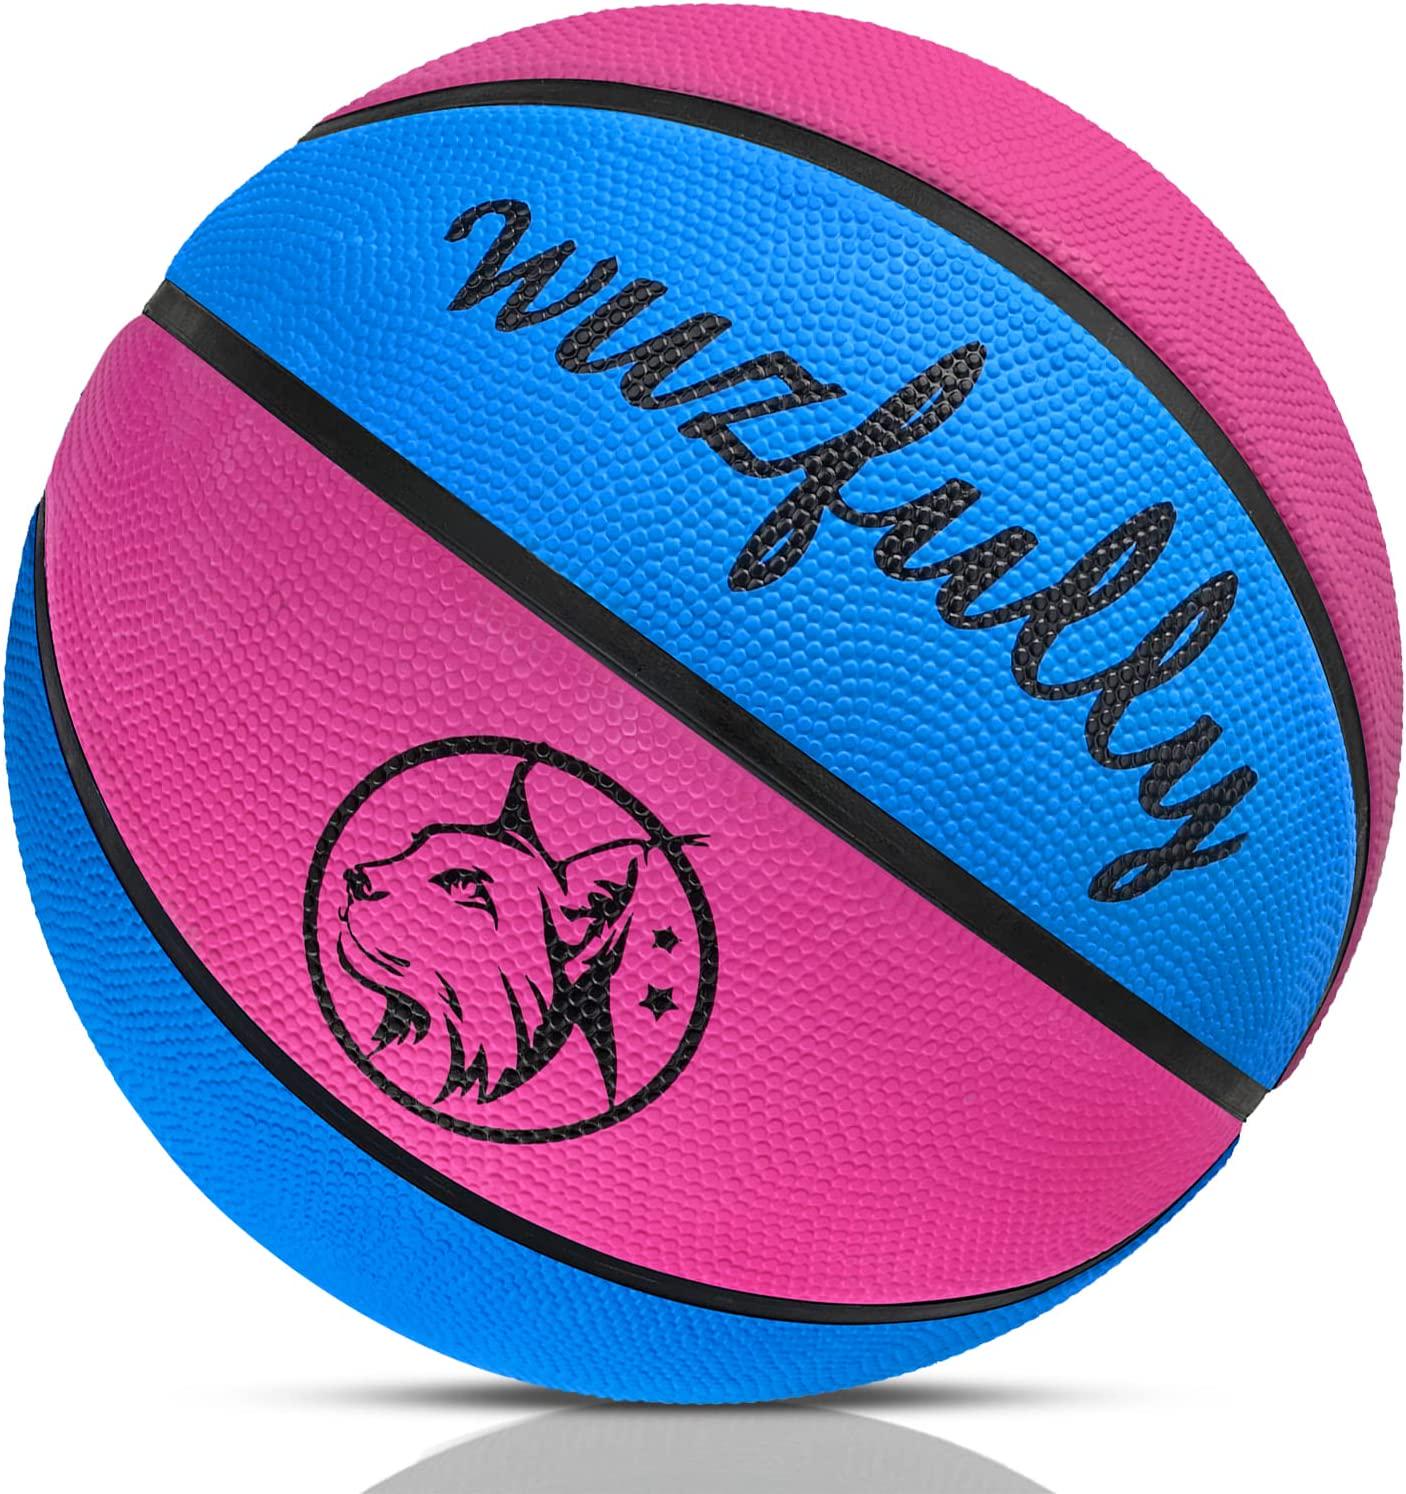 Wuzfully, Kids Rubber Basketball Size 5 (27.5 Inch) for Indoor Outdoor Pool Play Games